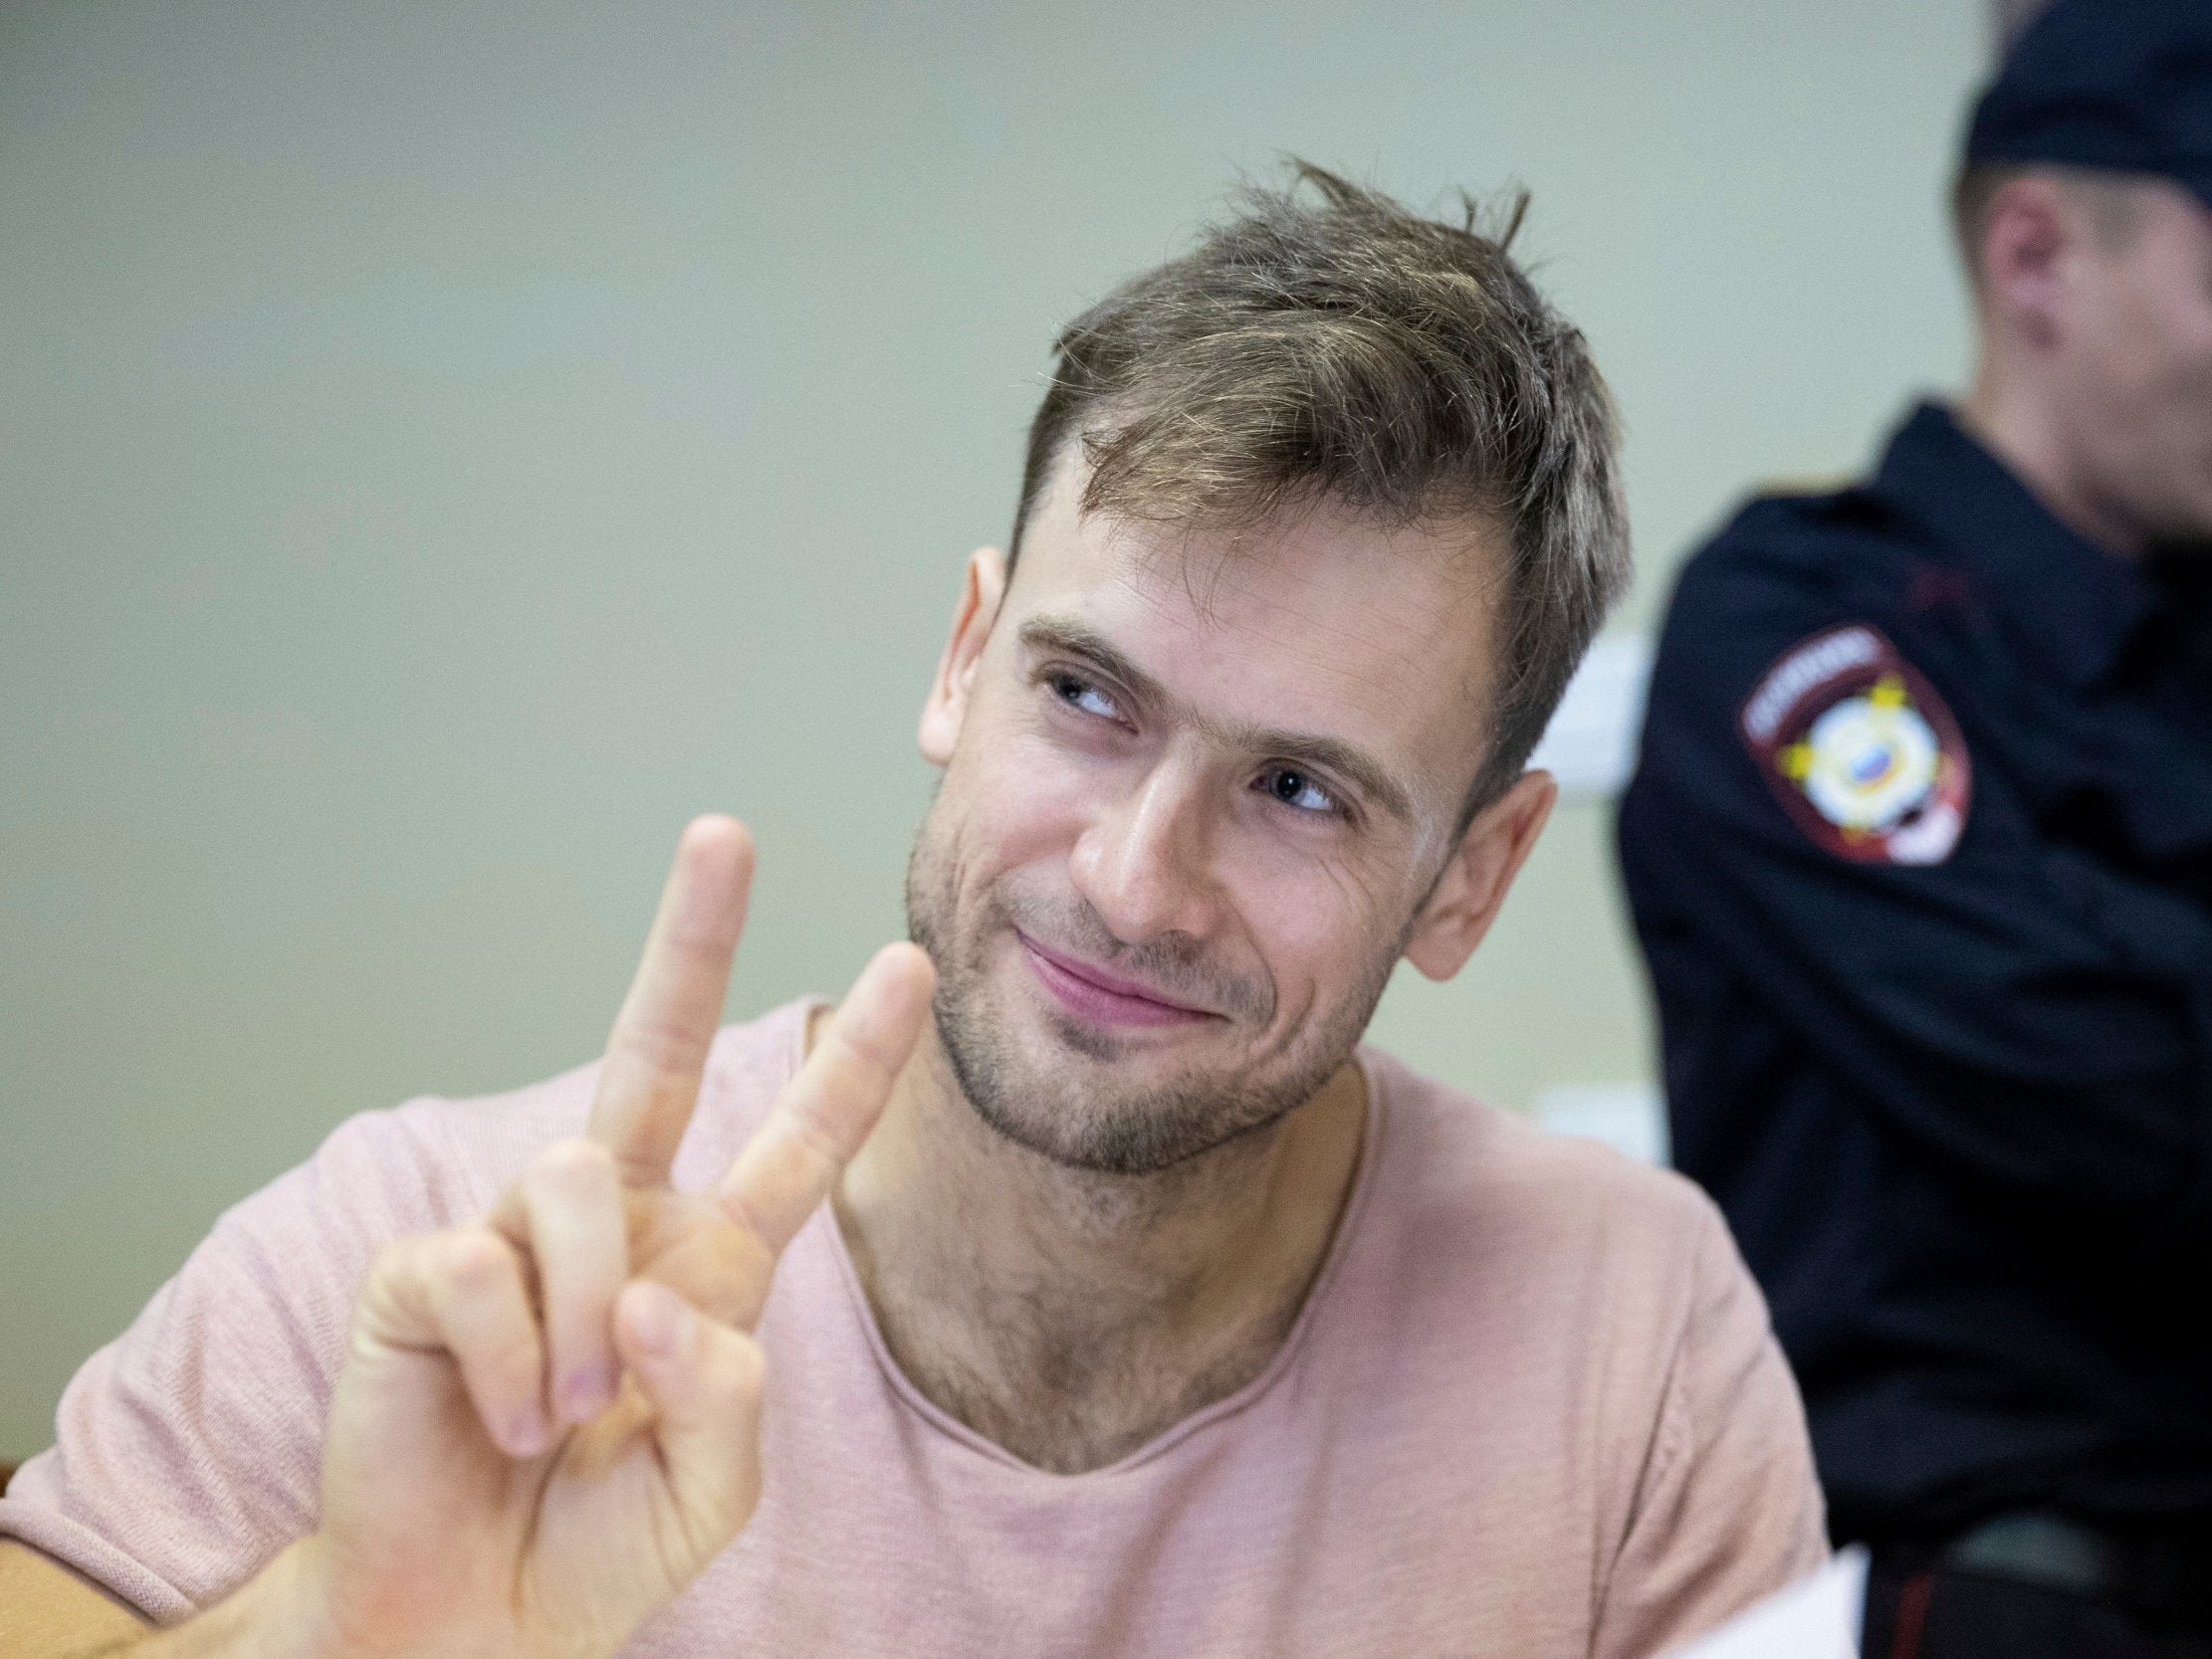 Pyotr Verzilov, a member of the feminist protest group Pussy Riot, in a court in Moscow in July